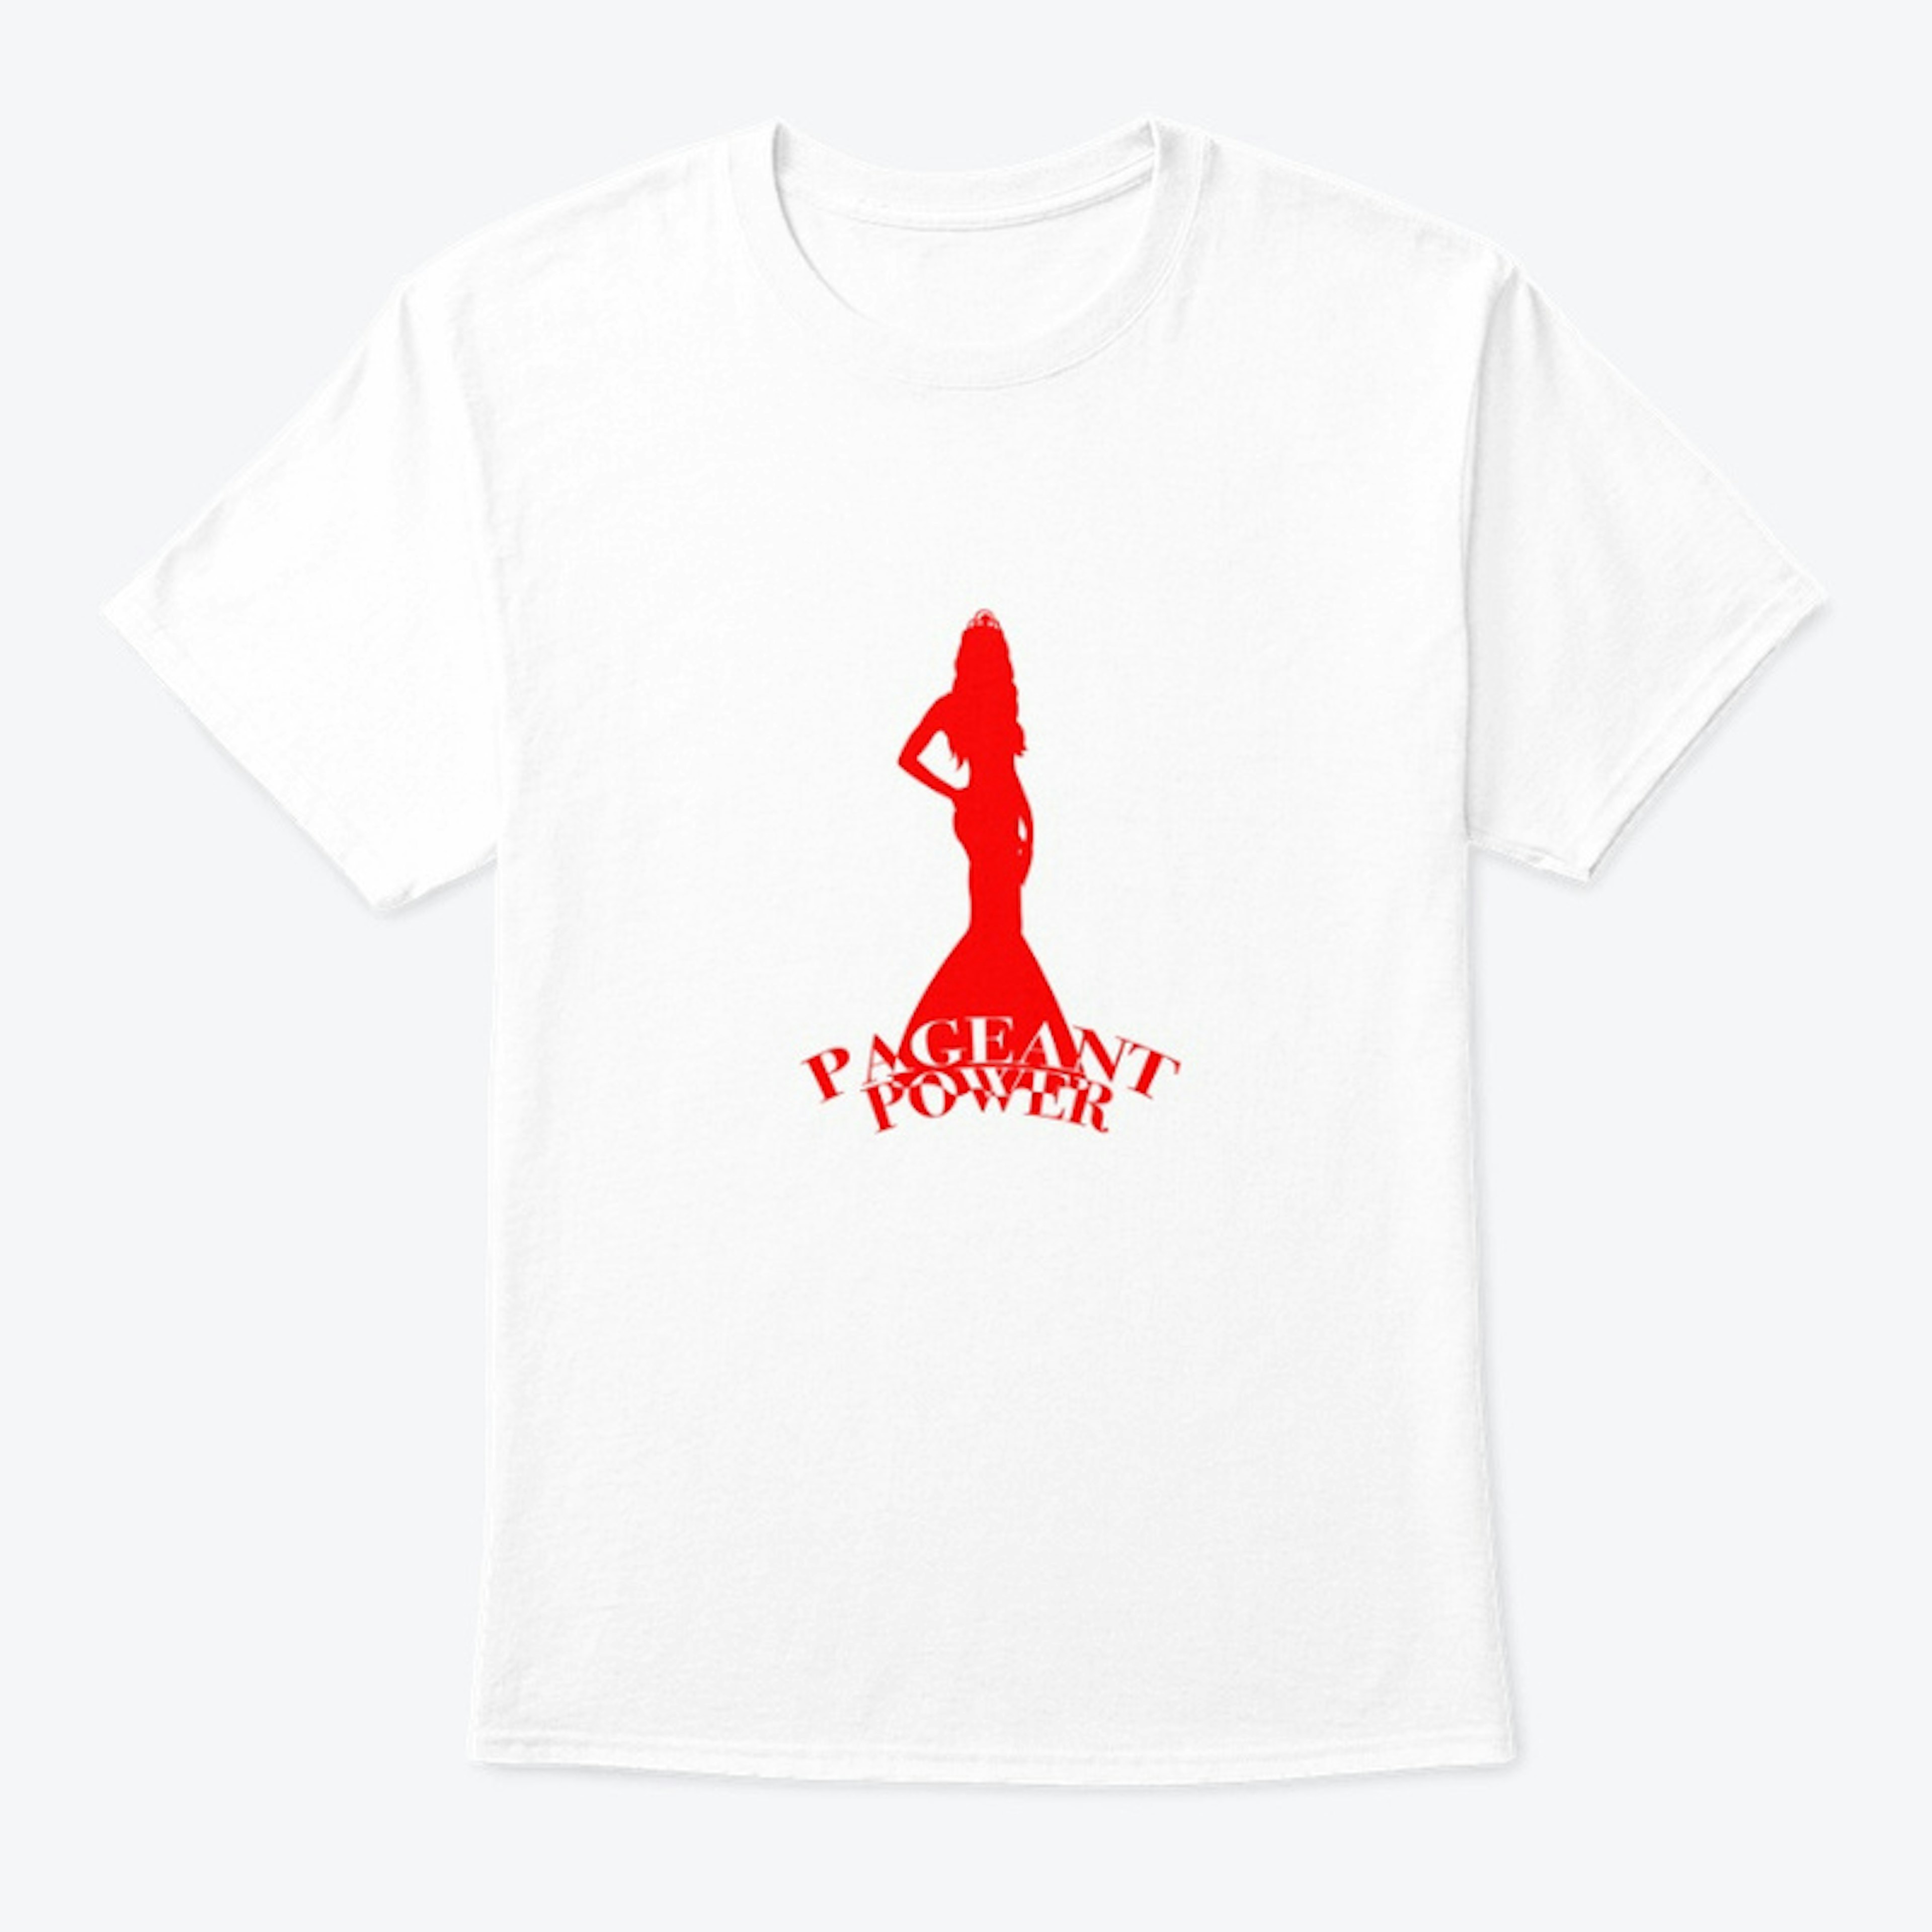 Pageant Power Tee